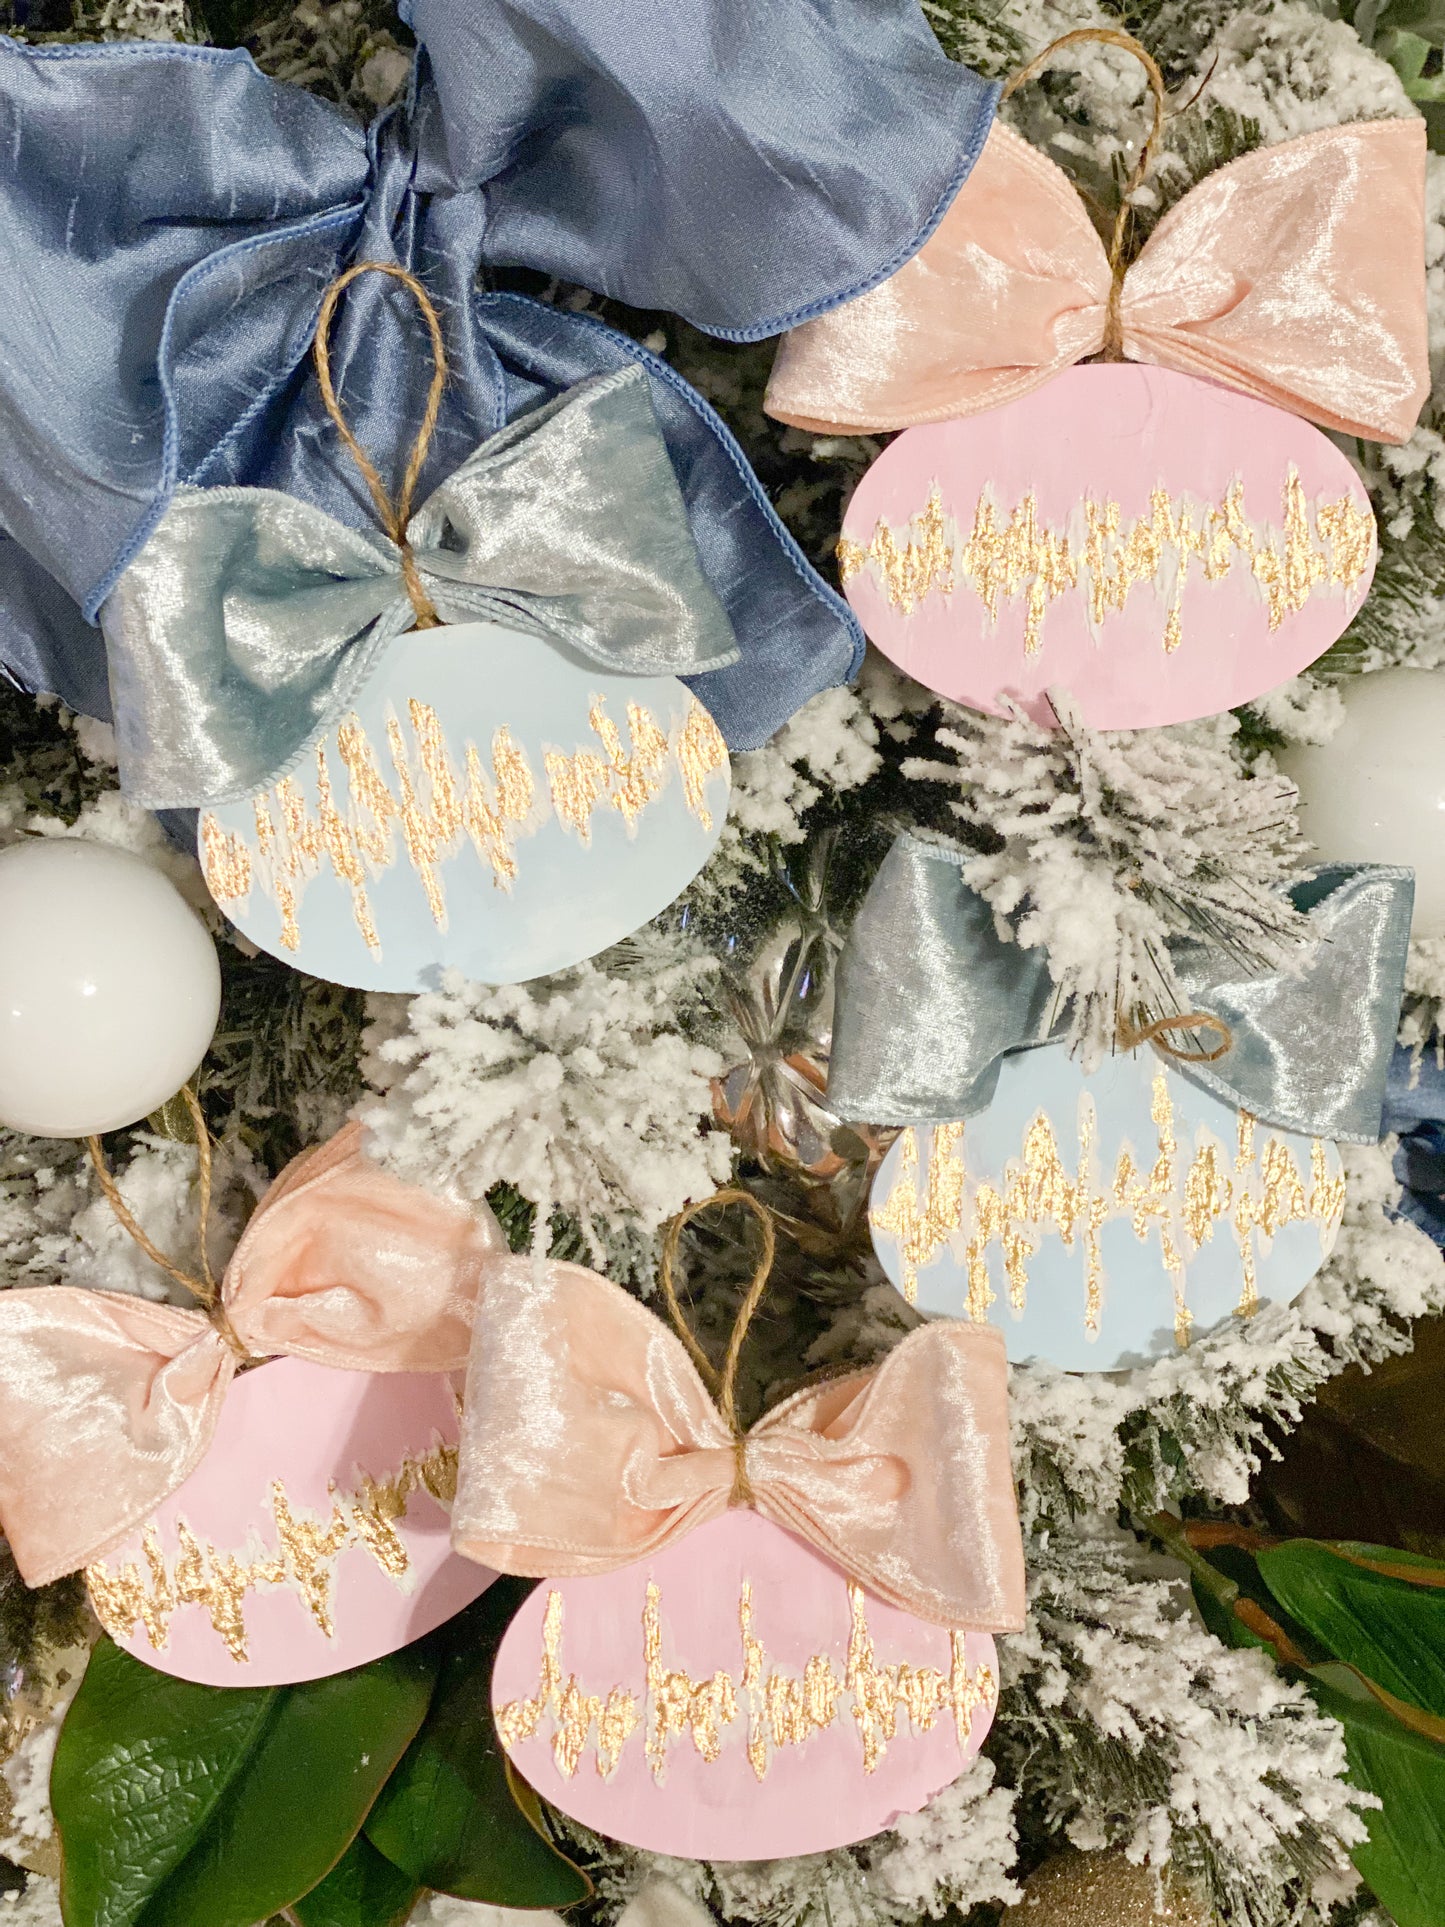 Hand painted heartbeat ornaments